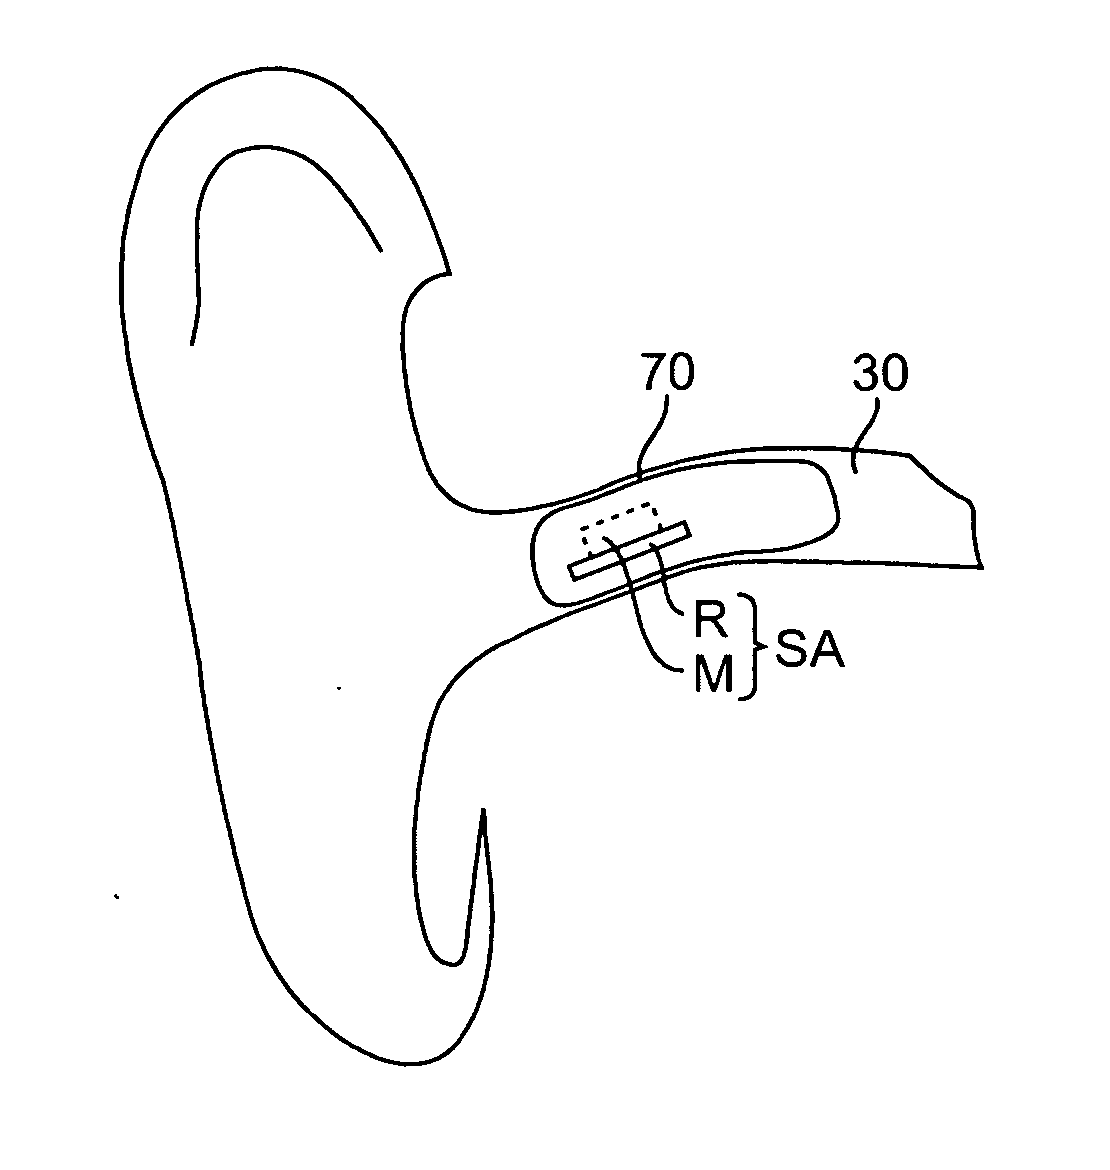 Remote magnetic activation of hearing devices